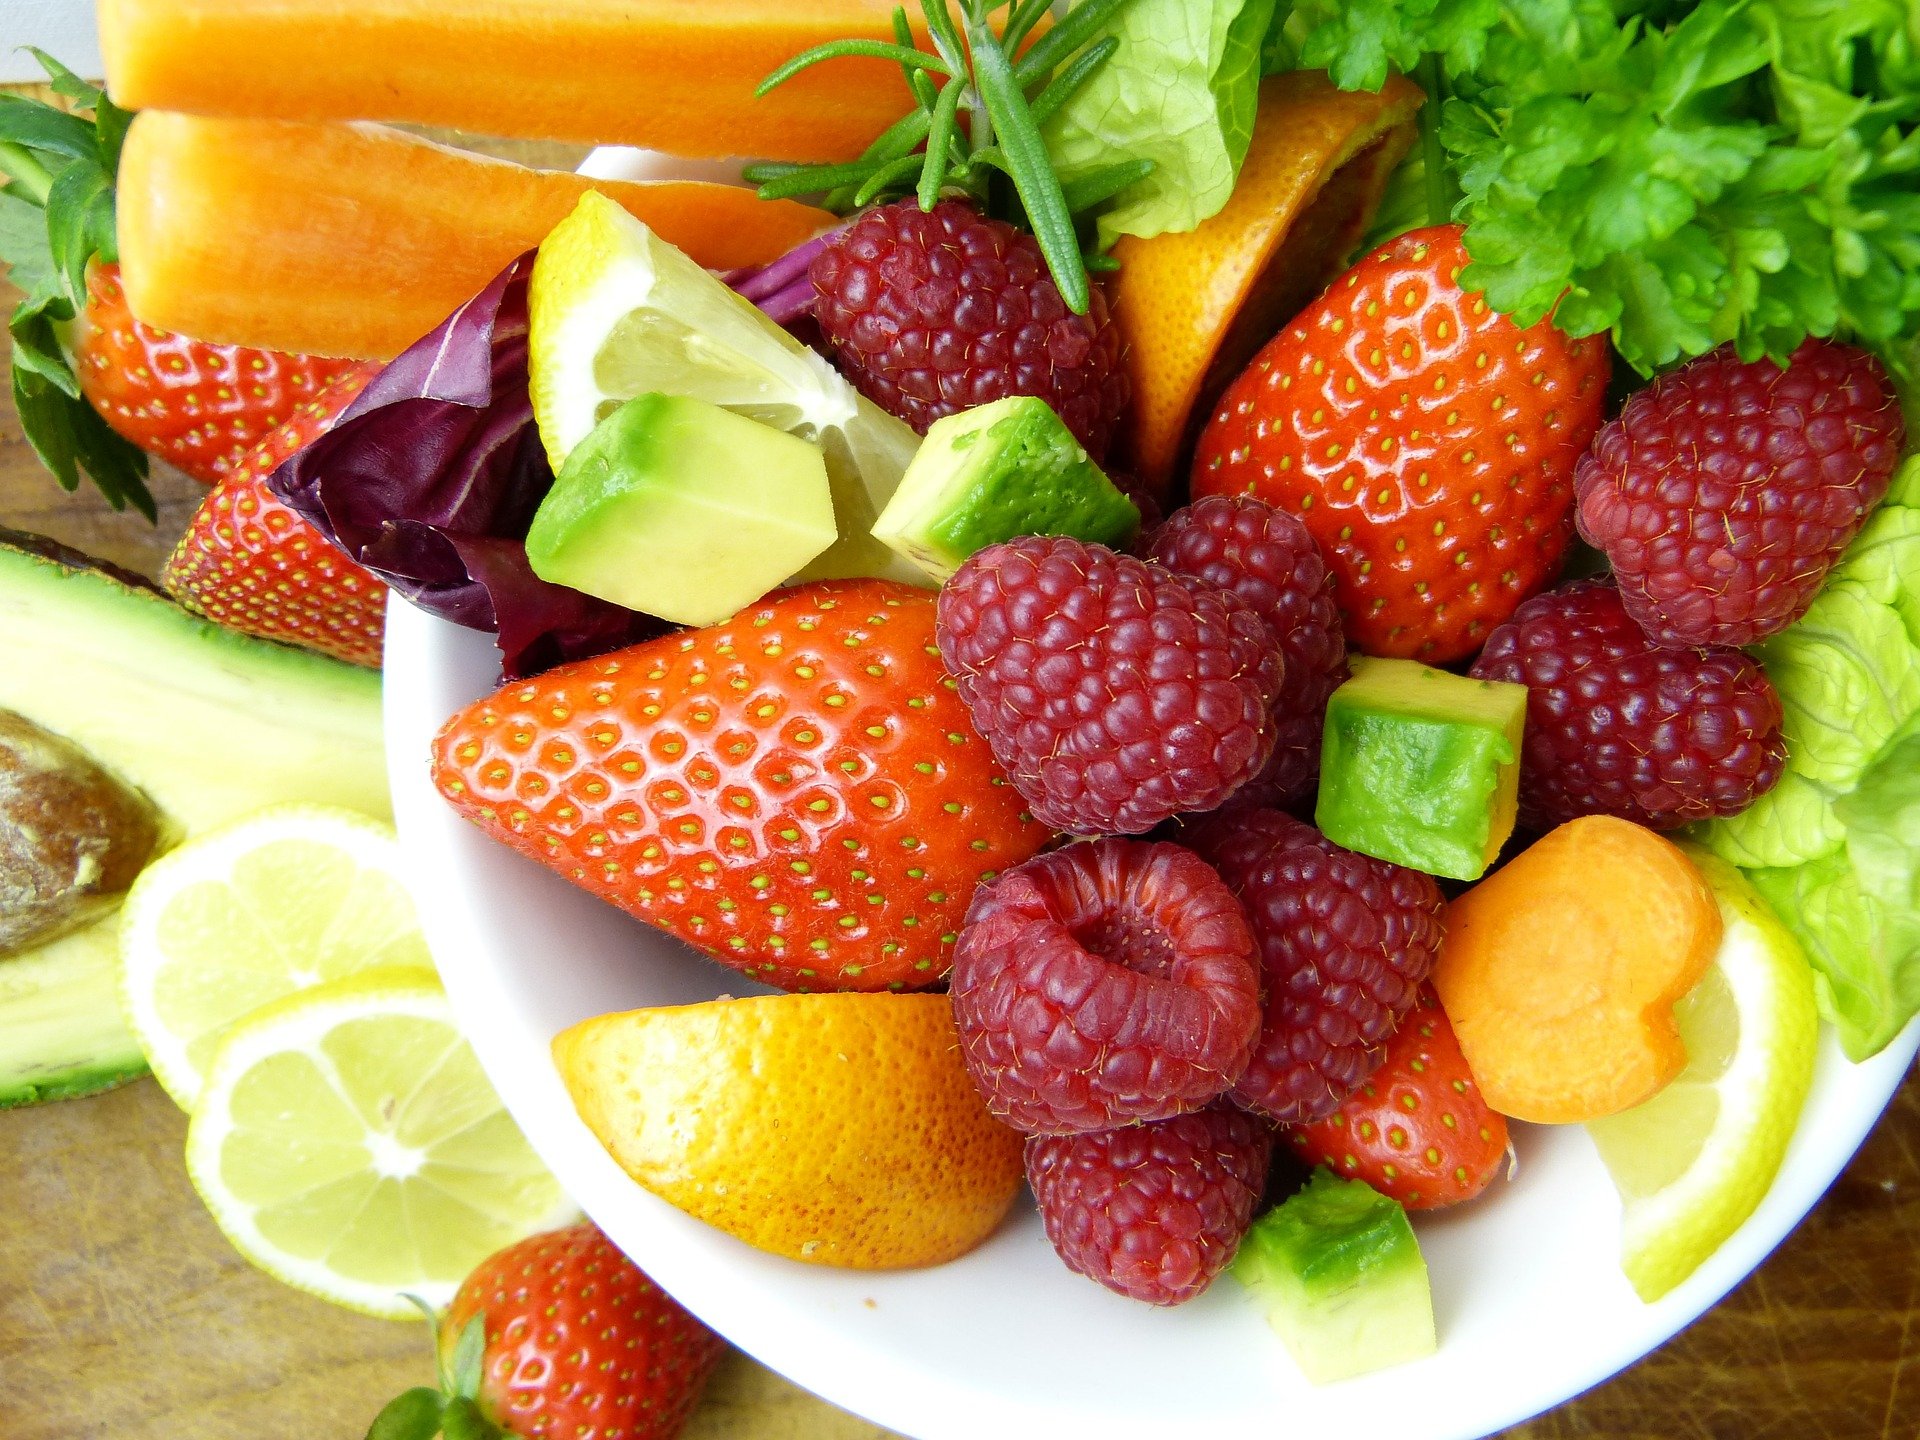 Why Fruits for Diabetics?